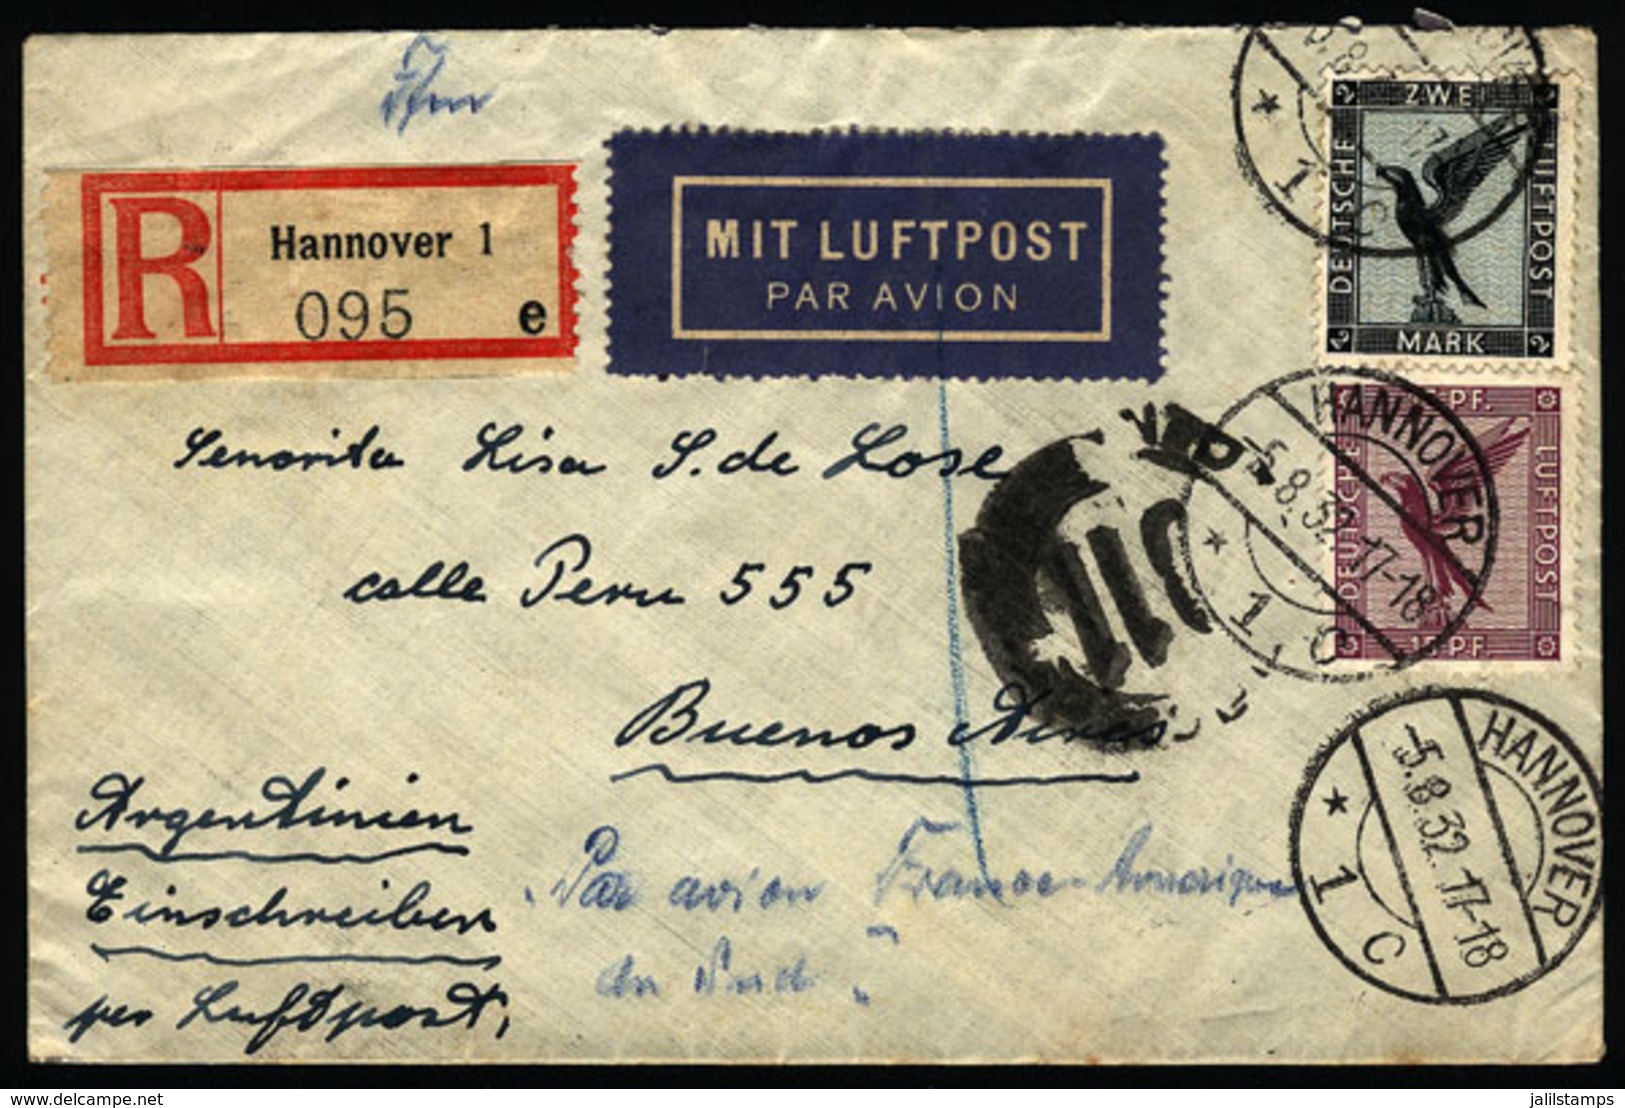 GERMANY: Registered Airmail Cover Sent From Hannover To Argentina On 5/AU/1932 By Air France, Franked With 2.15Mk., VF Q - [Voorlopers